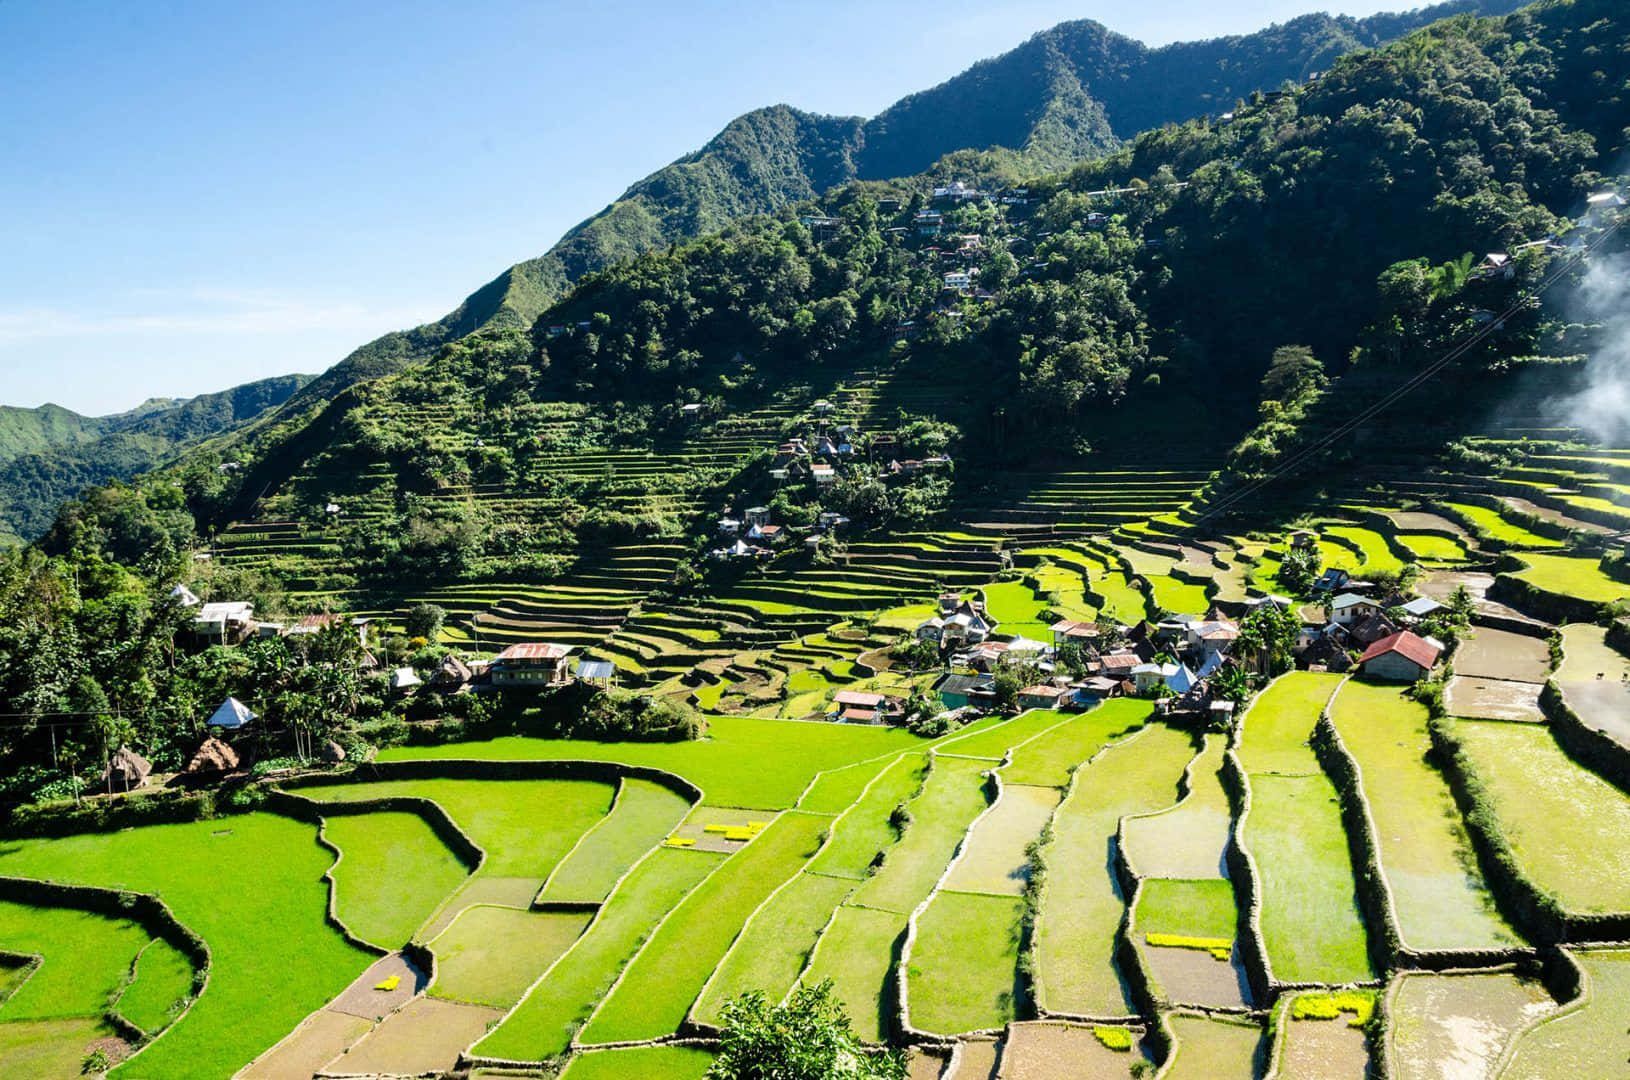 Banaue Rice Terraces In Philippines On A Sunny Day Wallpaper